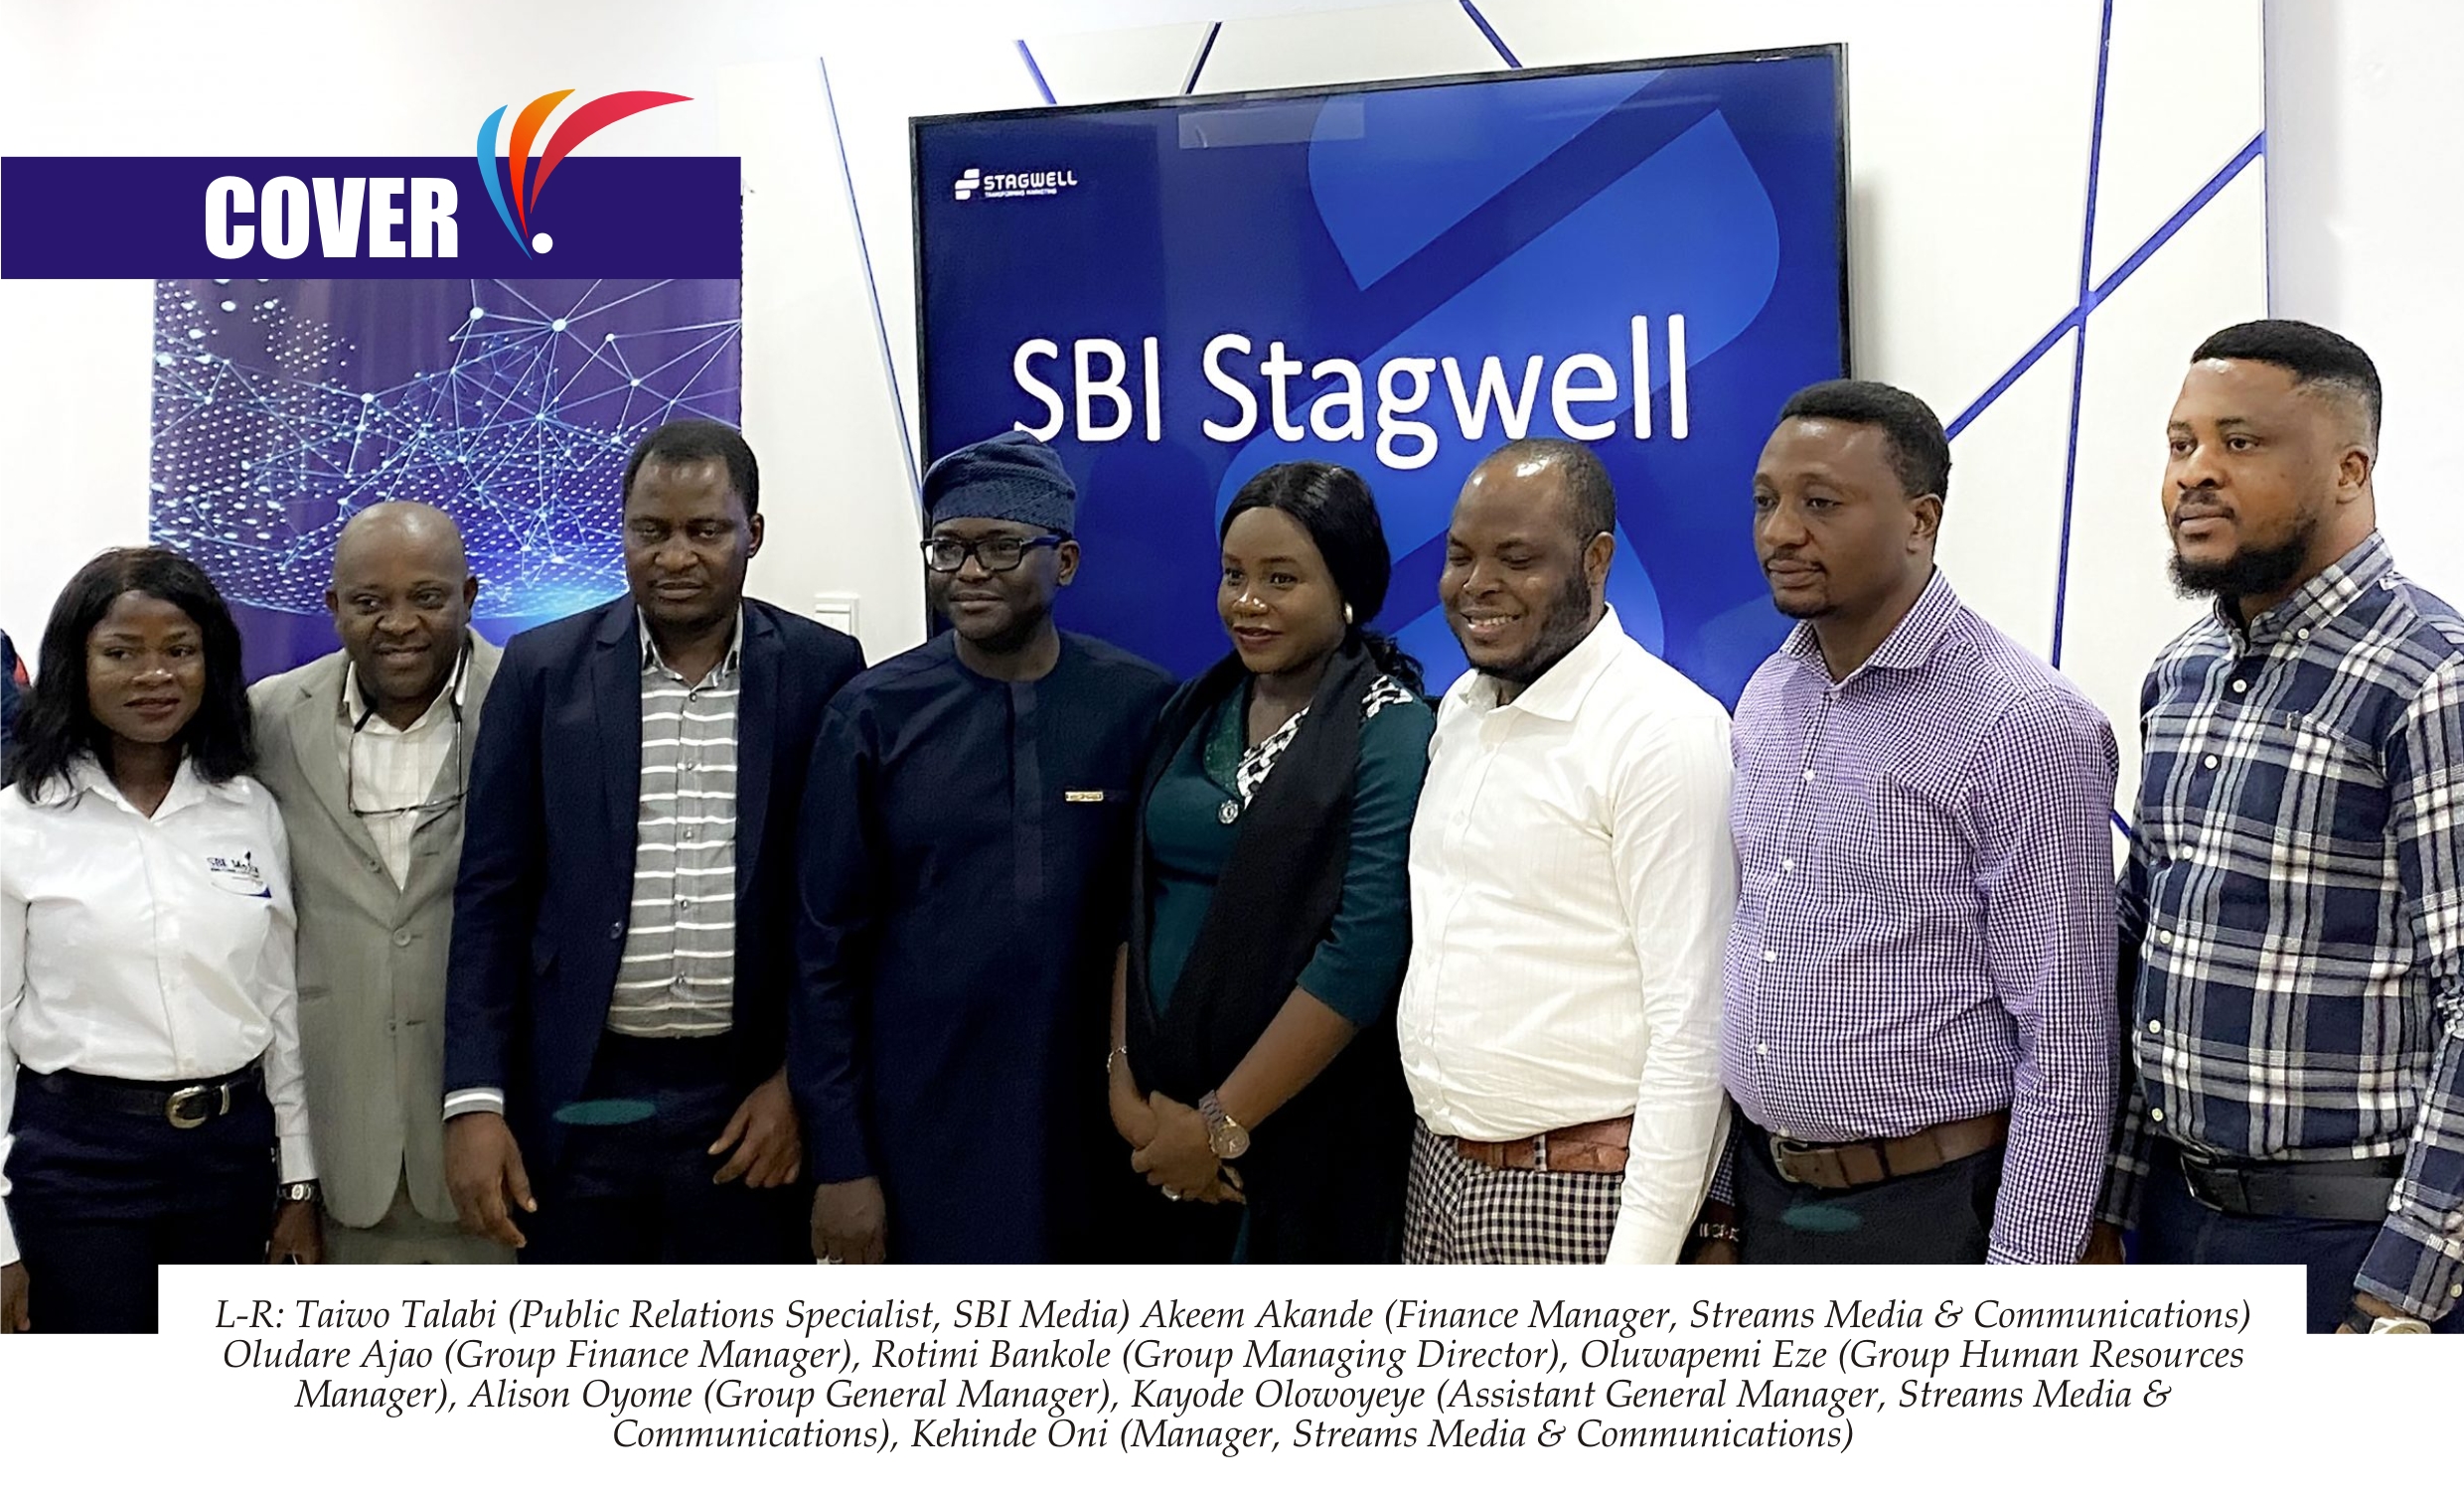 SBI Stagwell: Africa’s Global Media Agency, Leading The Pack With Creativity, Data & Innovation -marketingspace.com.ng